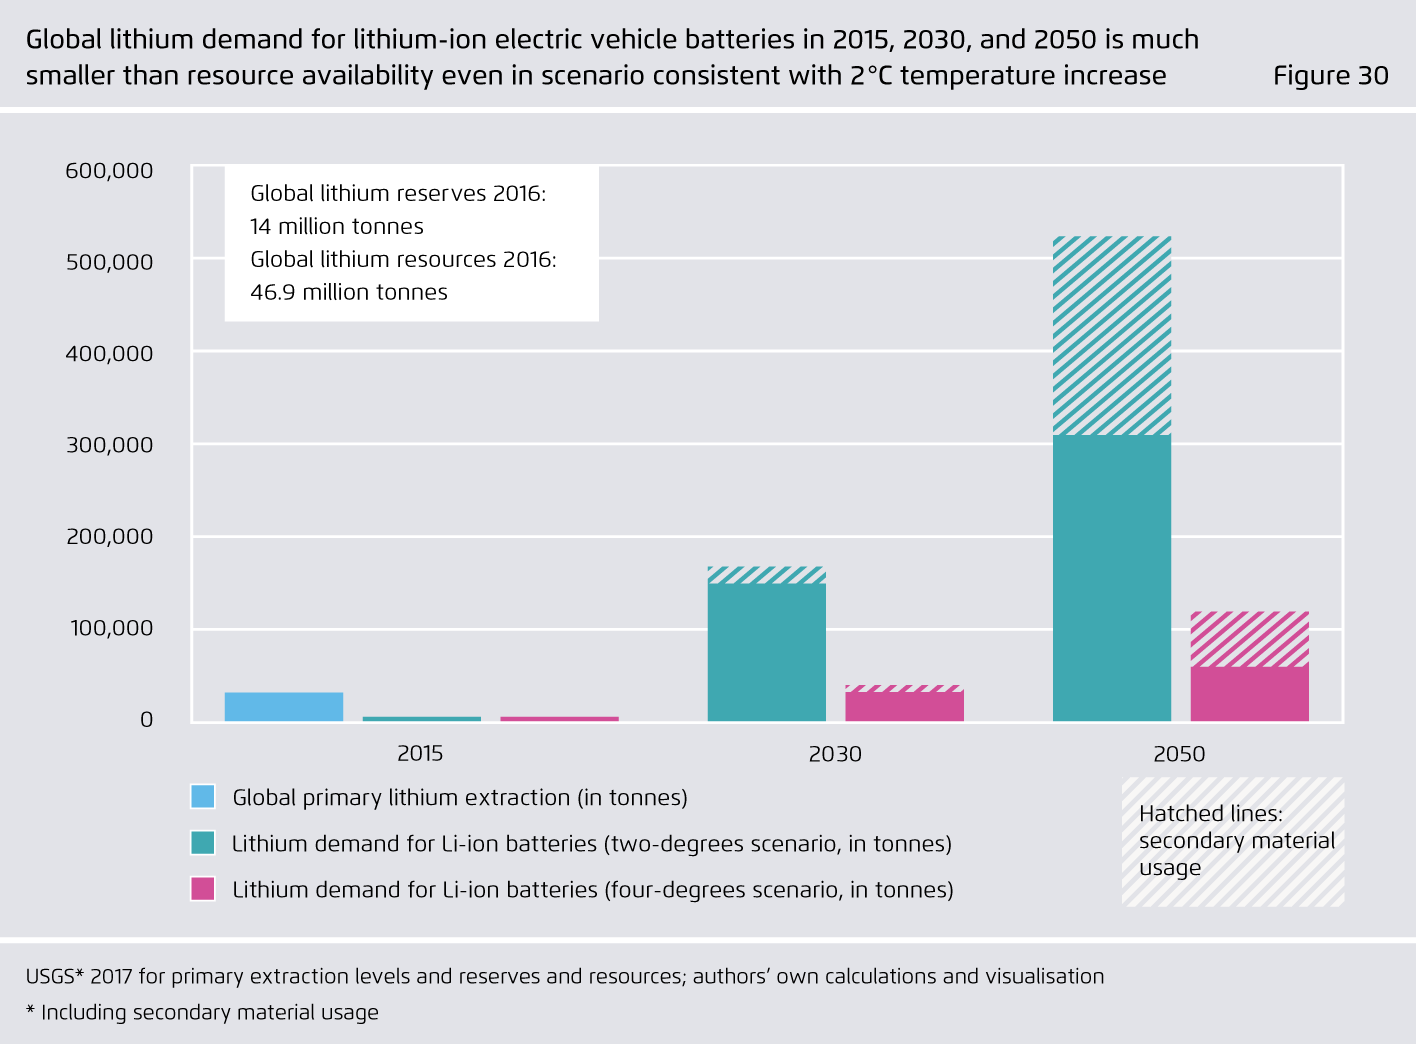 Preview for Global lithium demand for lithium-ion electric vehicle batteries in 2015, 2030, and 2050 is much smaller than resource availability even in scenario consistent with 2°C temperature increase